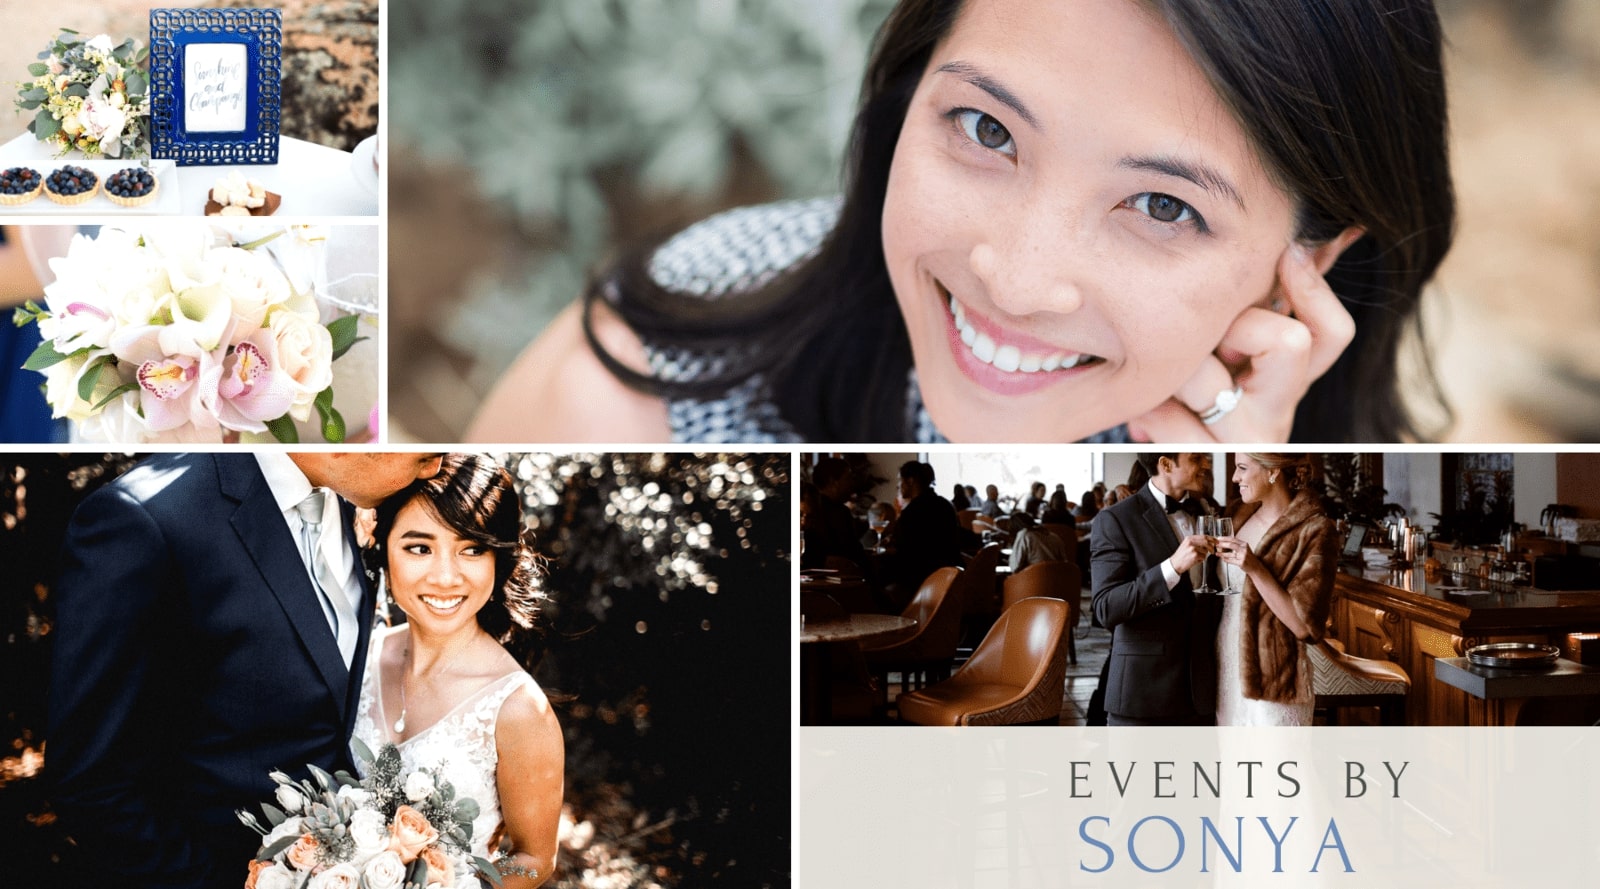 Today's Expert: Sonya Mo from Events by Sonya